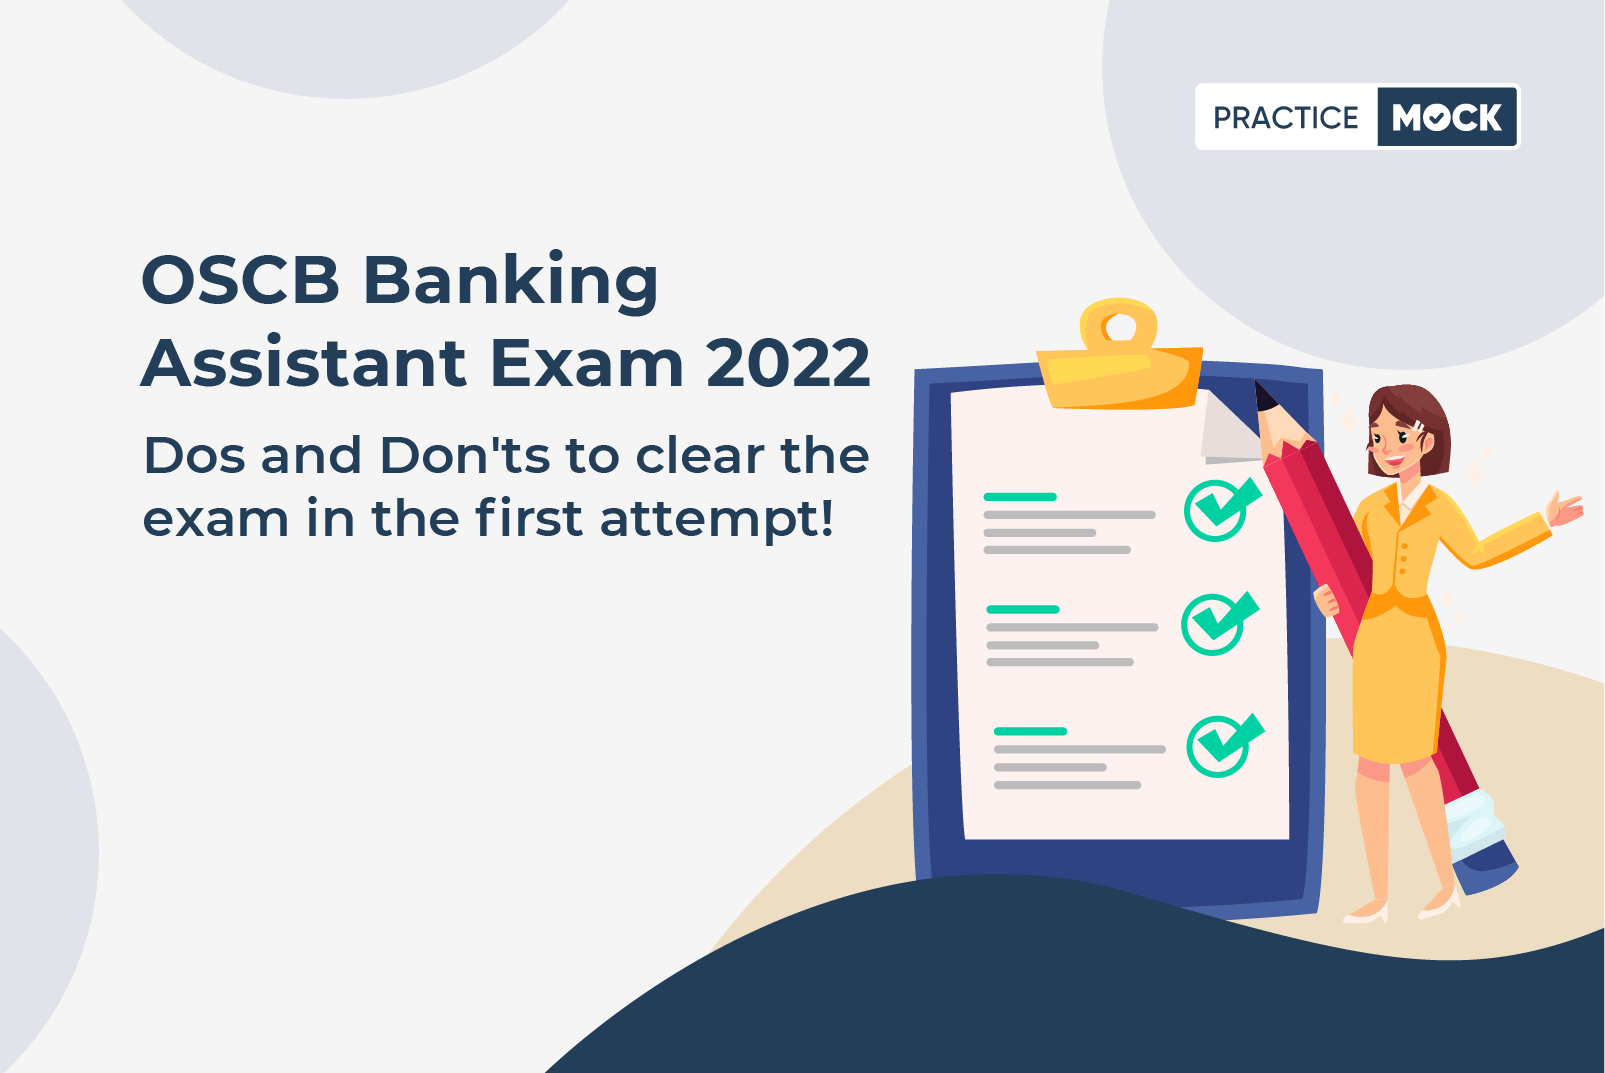 Do's & Don'ts for OSCB Banking Assistant Exam 2022